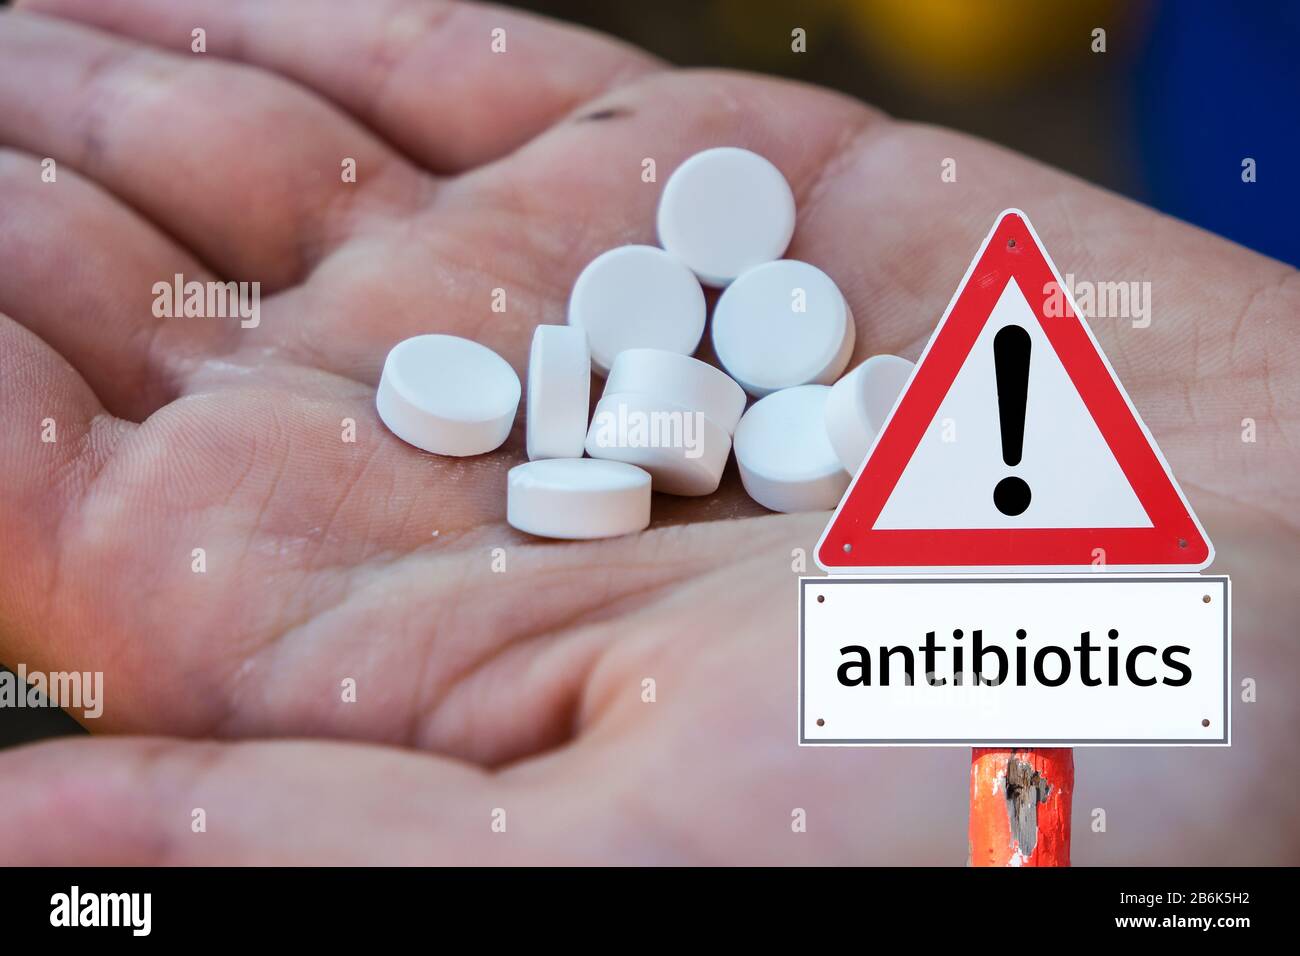 Hand holding tablets and warning sign of antibiotics Stock Photo